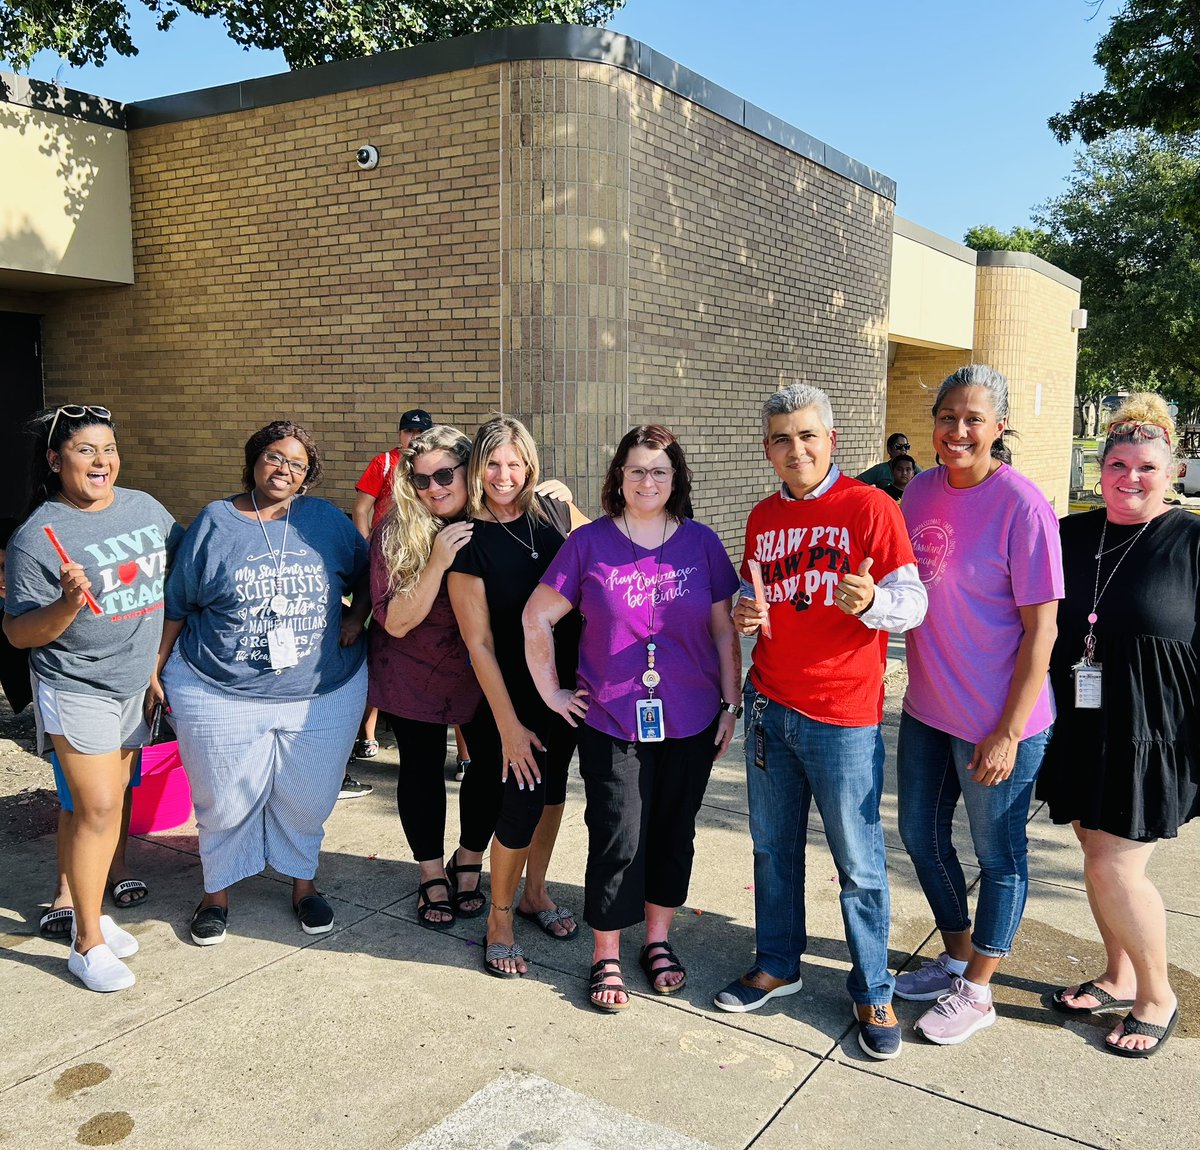 A wonderful, successful Popsicles with Principals @ShawBulldogs. We felt so welcomed by the community! #GrowingLoveAndDetermination
#Shawsome
#MadeToExcel
#MISDExcellence
#ExcellenceAlways
#BelieveinMesquite